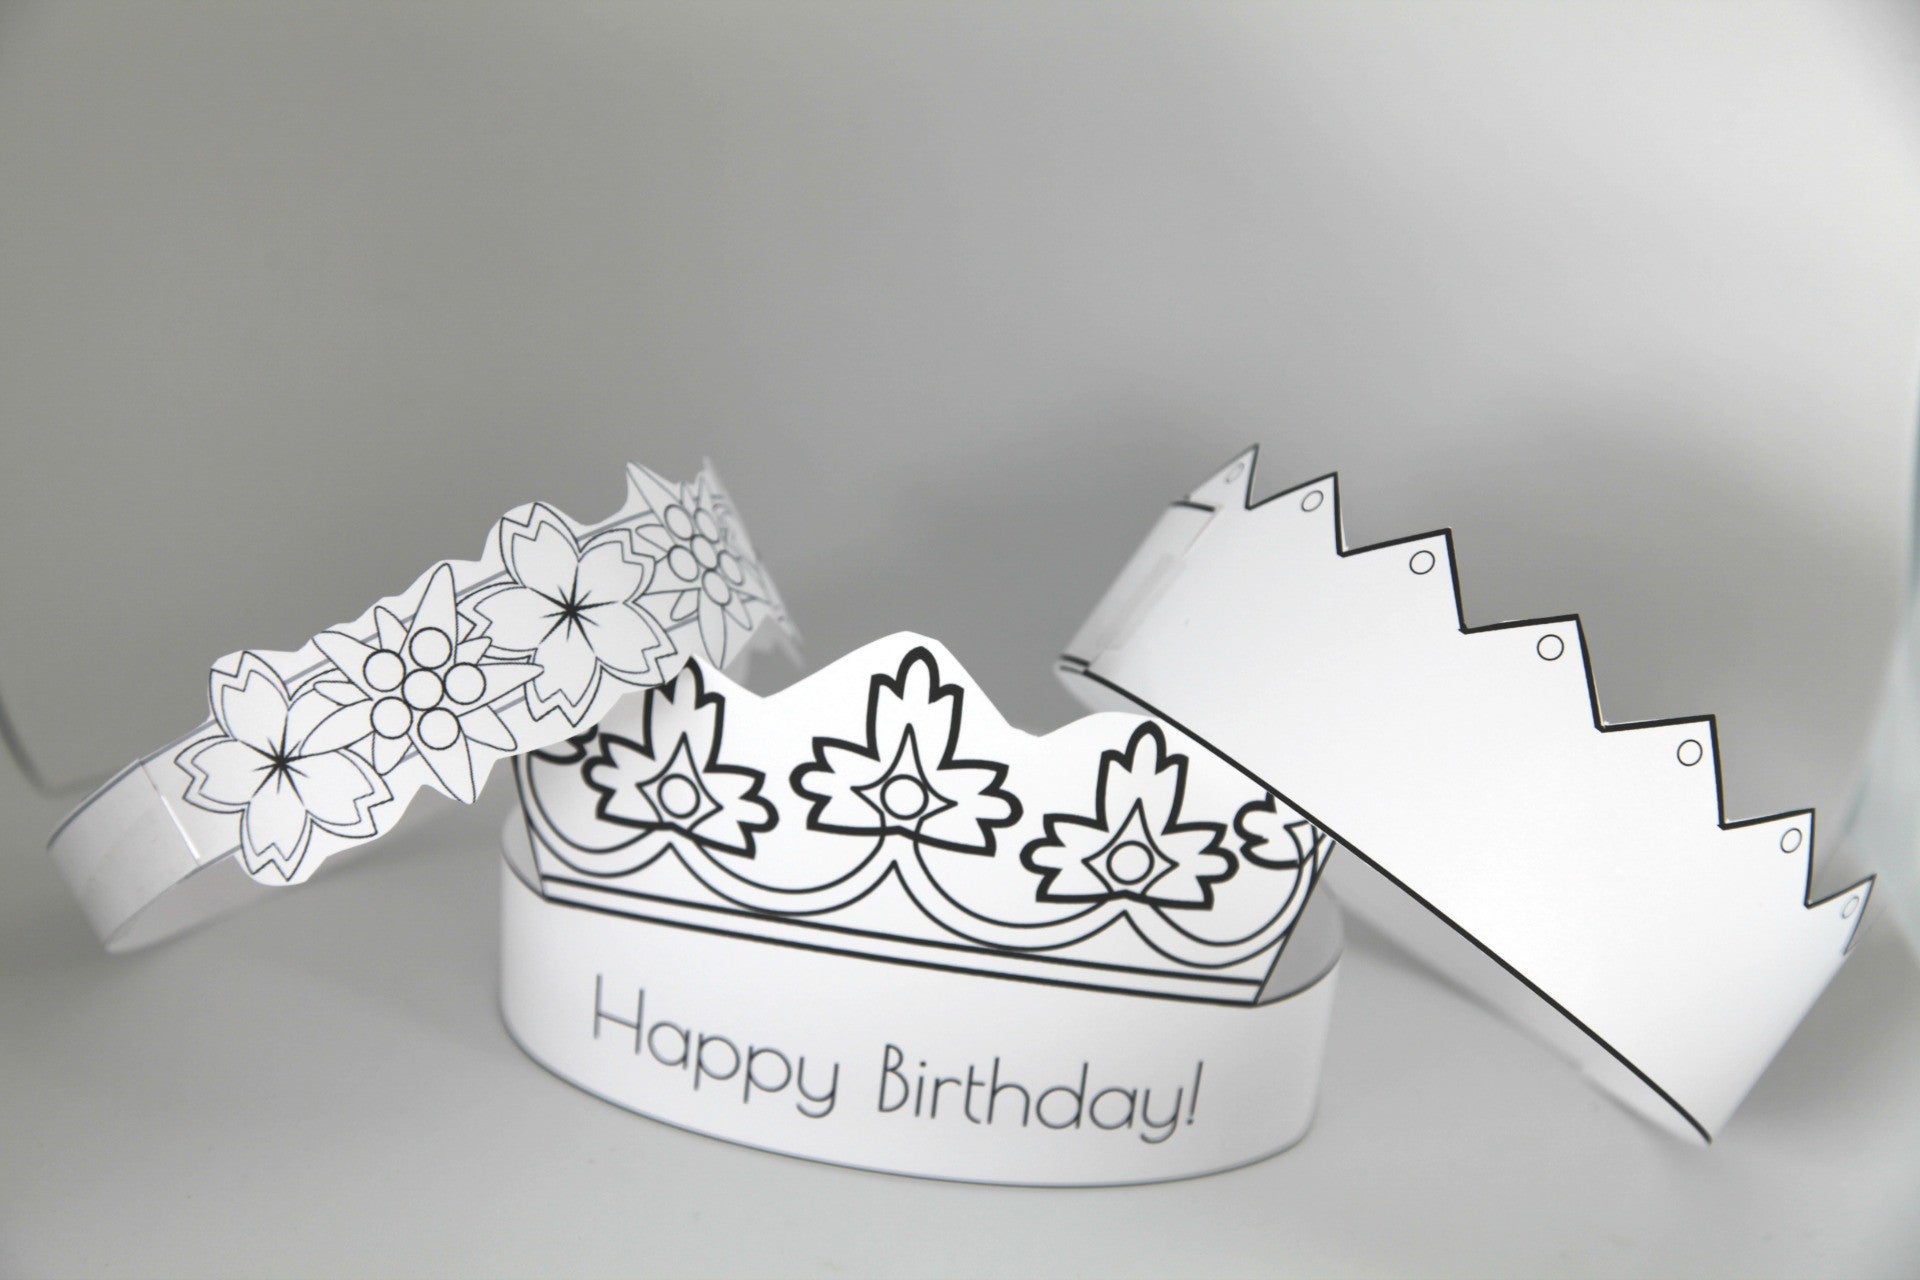 Paper Crown Pictures